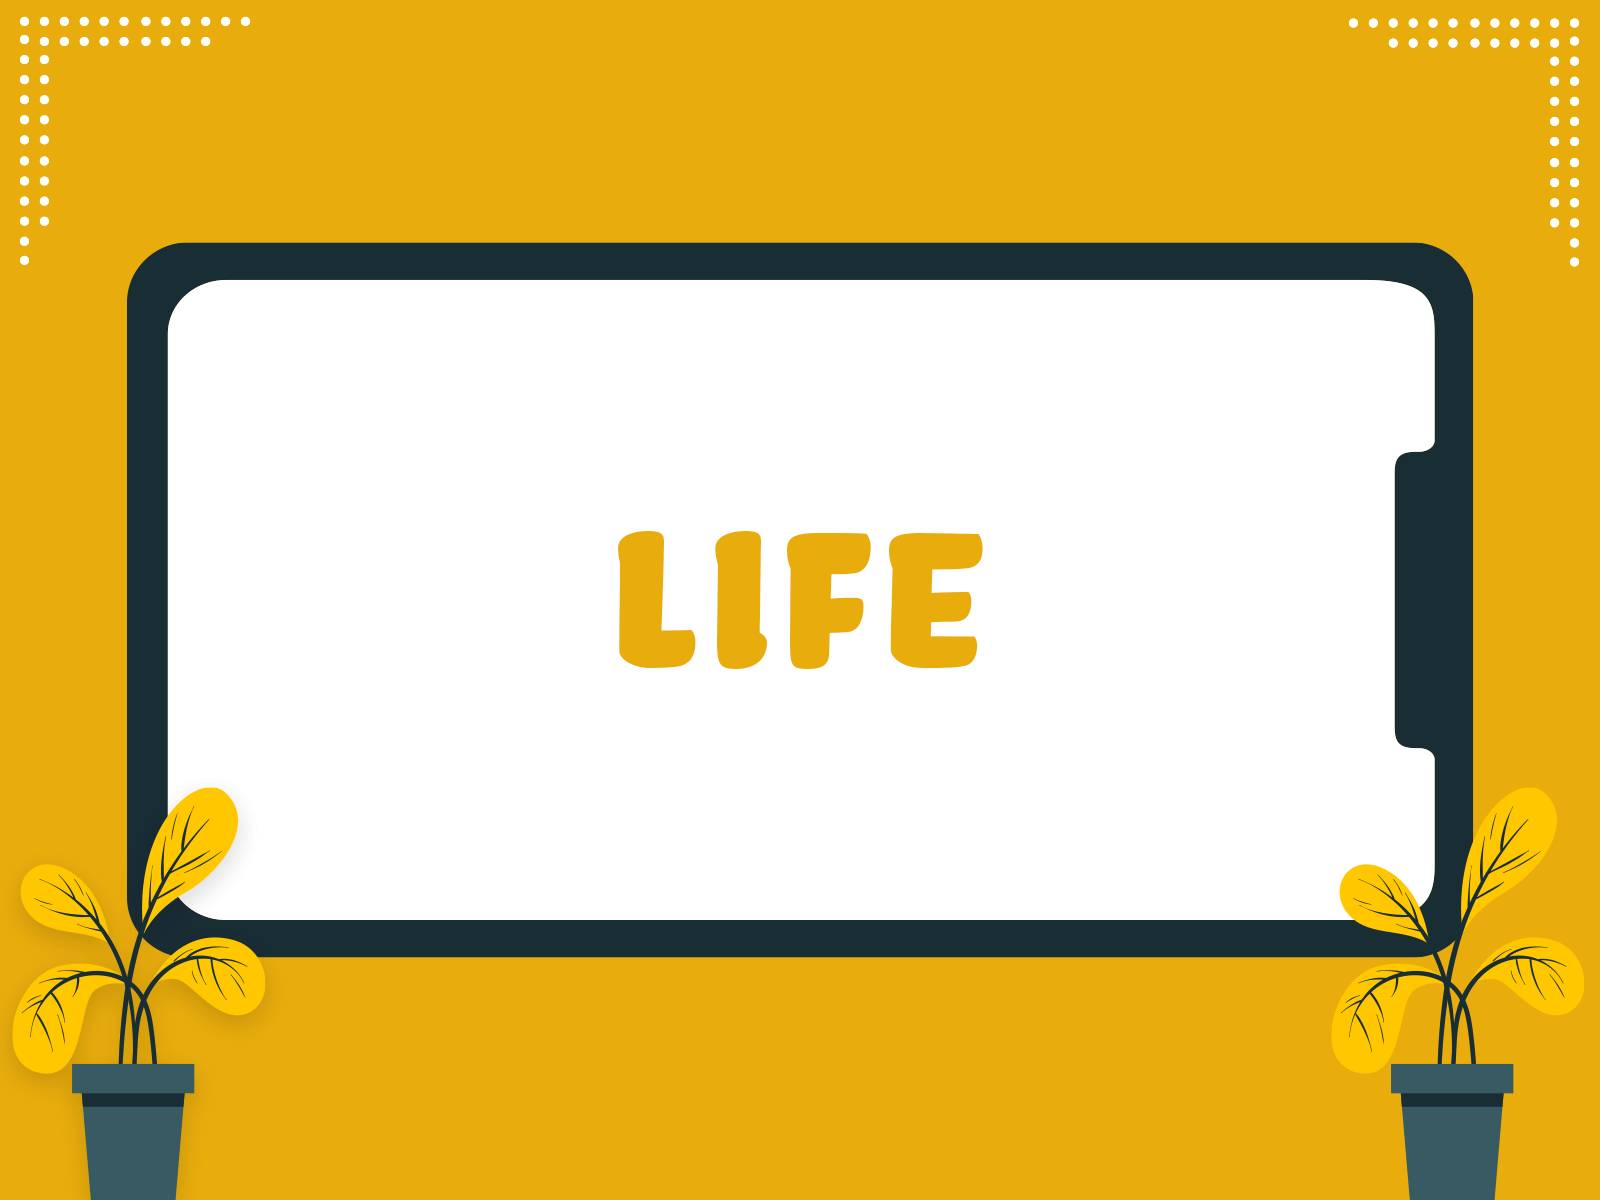 LIFE GIF Animation by Amit Pandey on Dribbble